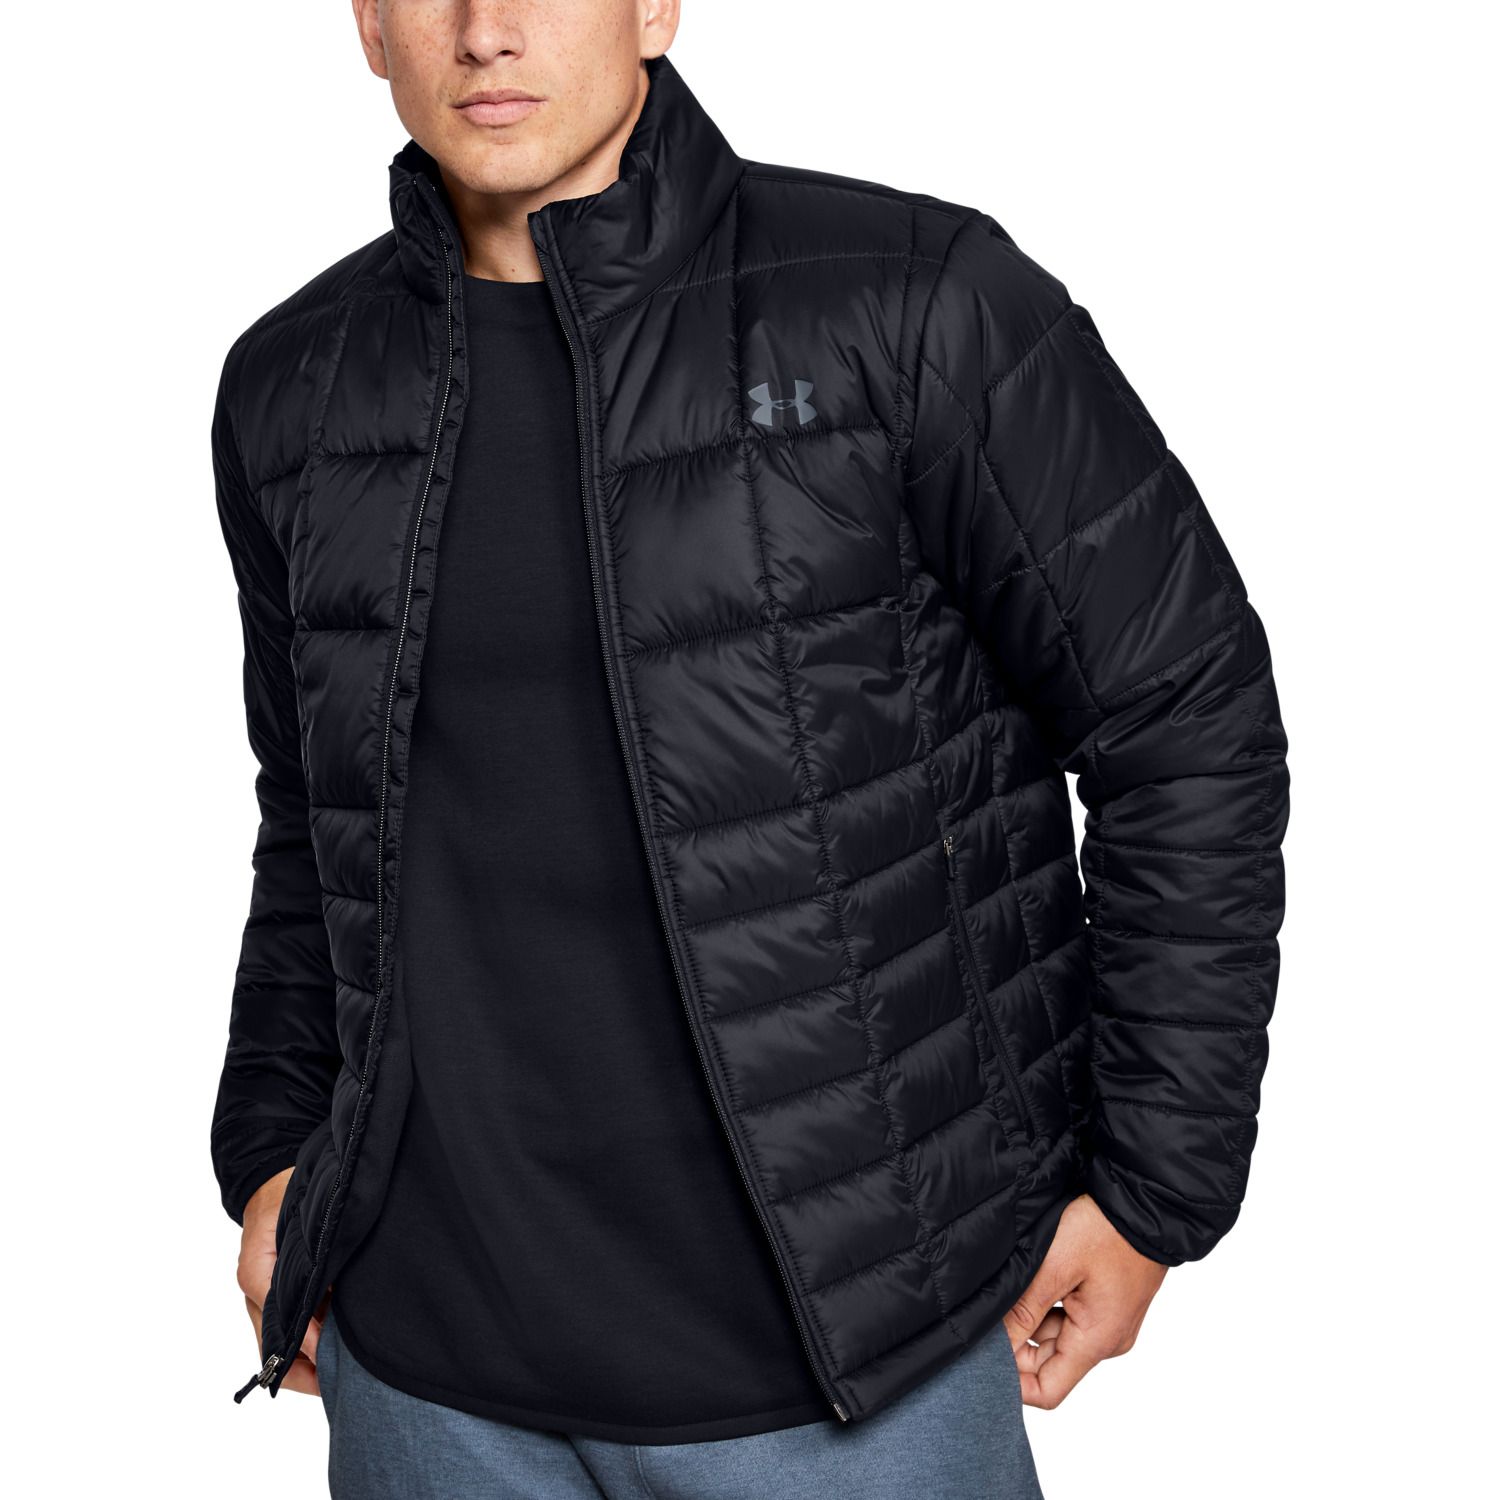 Men's Under Armour Insulated Jacket